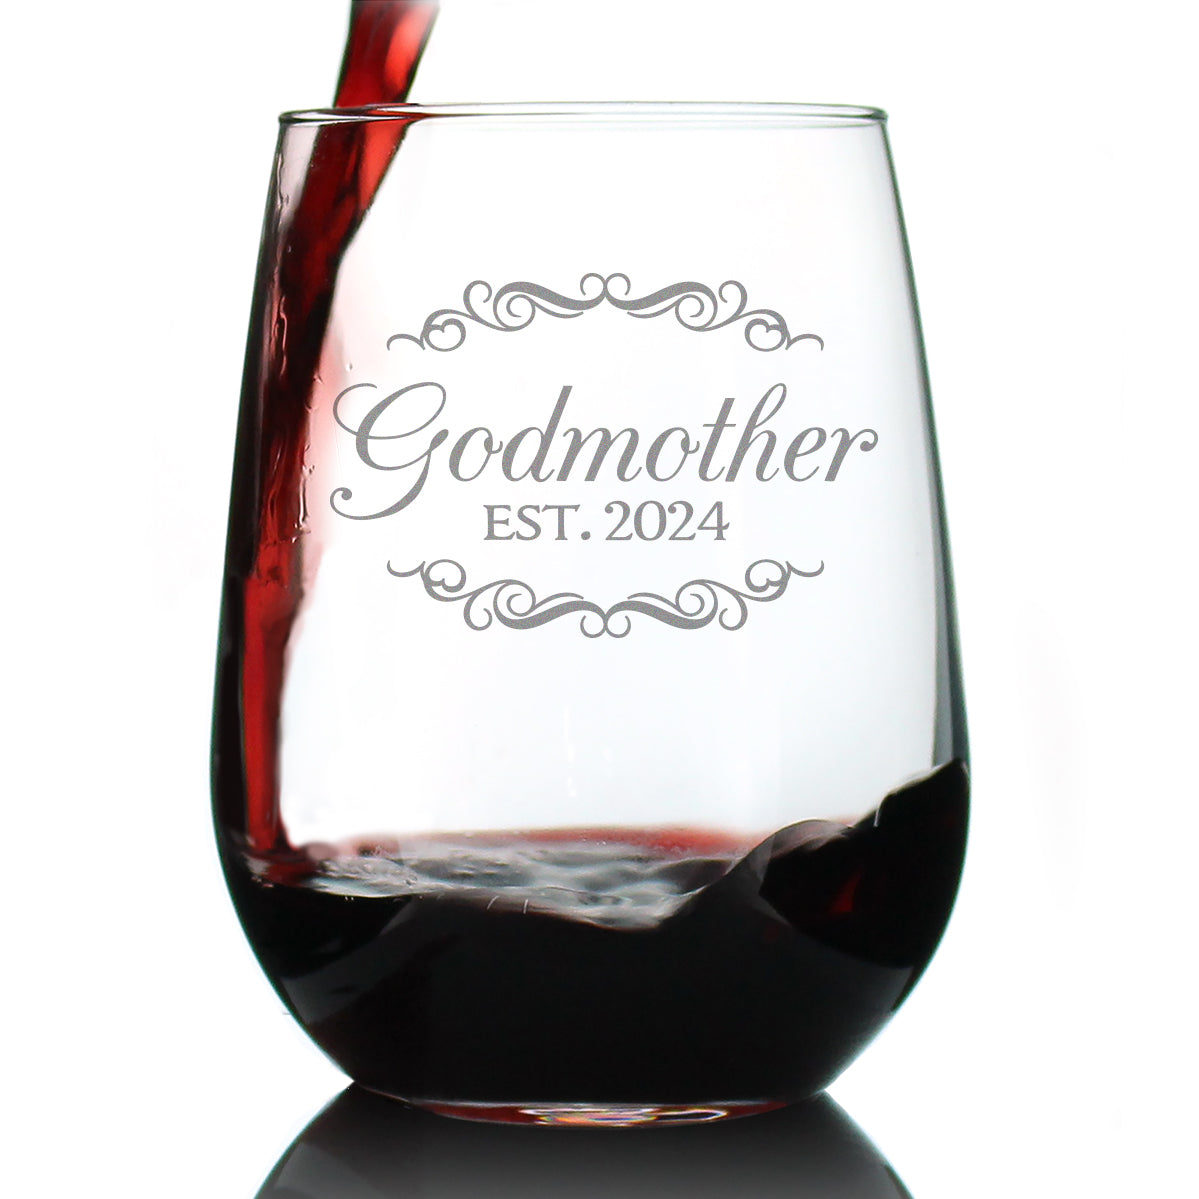 Godmother Est 2024 - New Godmother Stemless Wine Glass Proposal Gift for First Time Godparents - Decorative 17 Oz Large Glasses